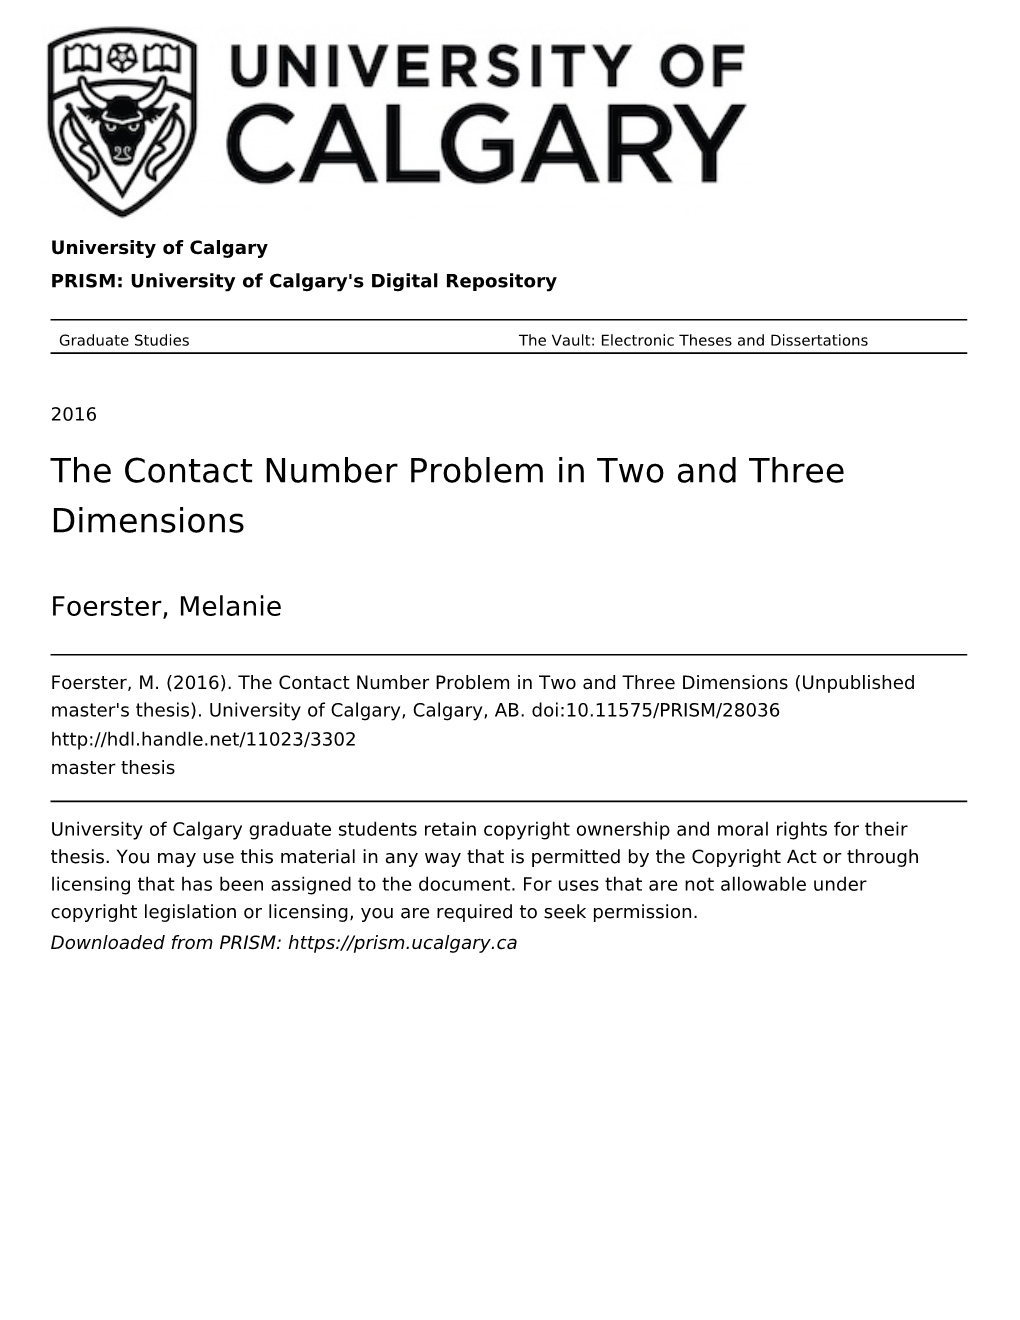 The Contact Number Problem in Two and Three Dimensions